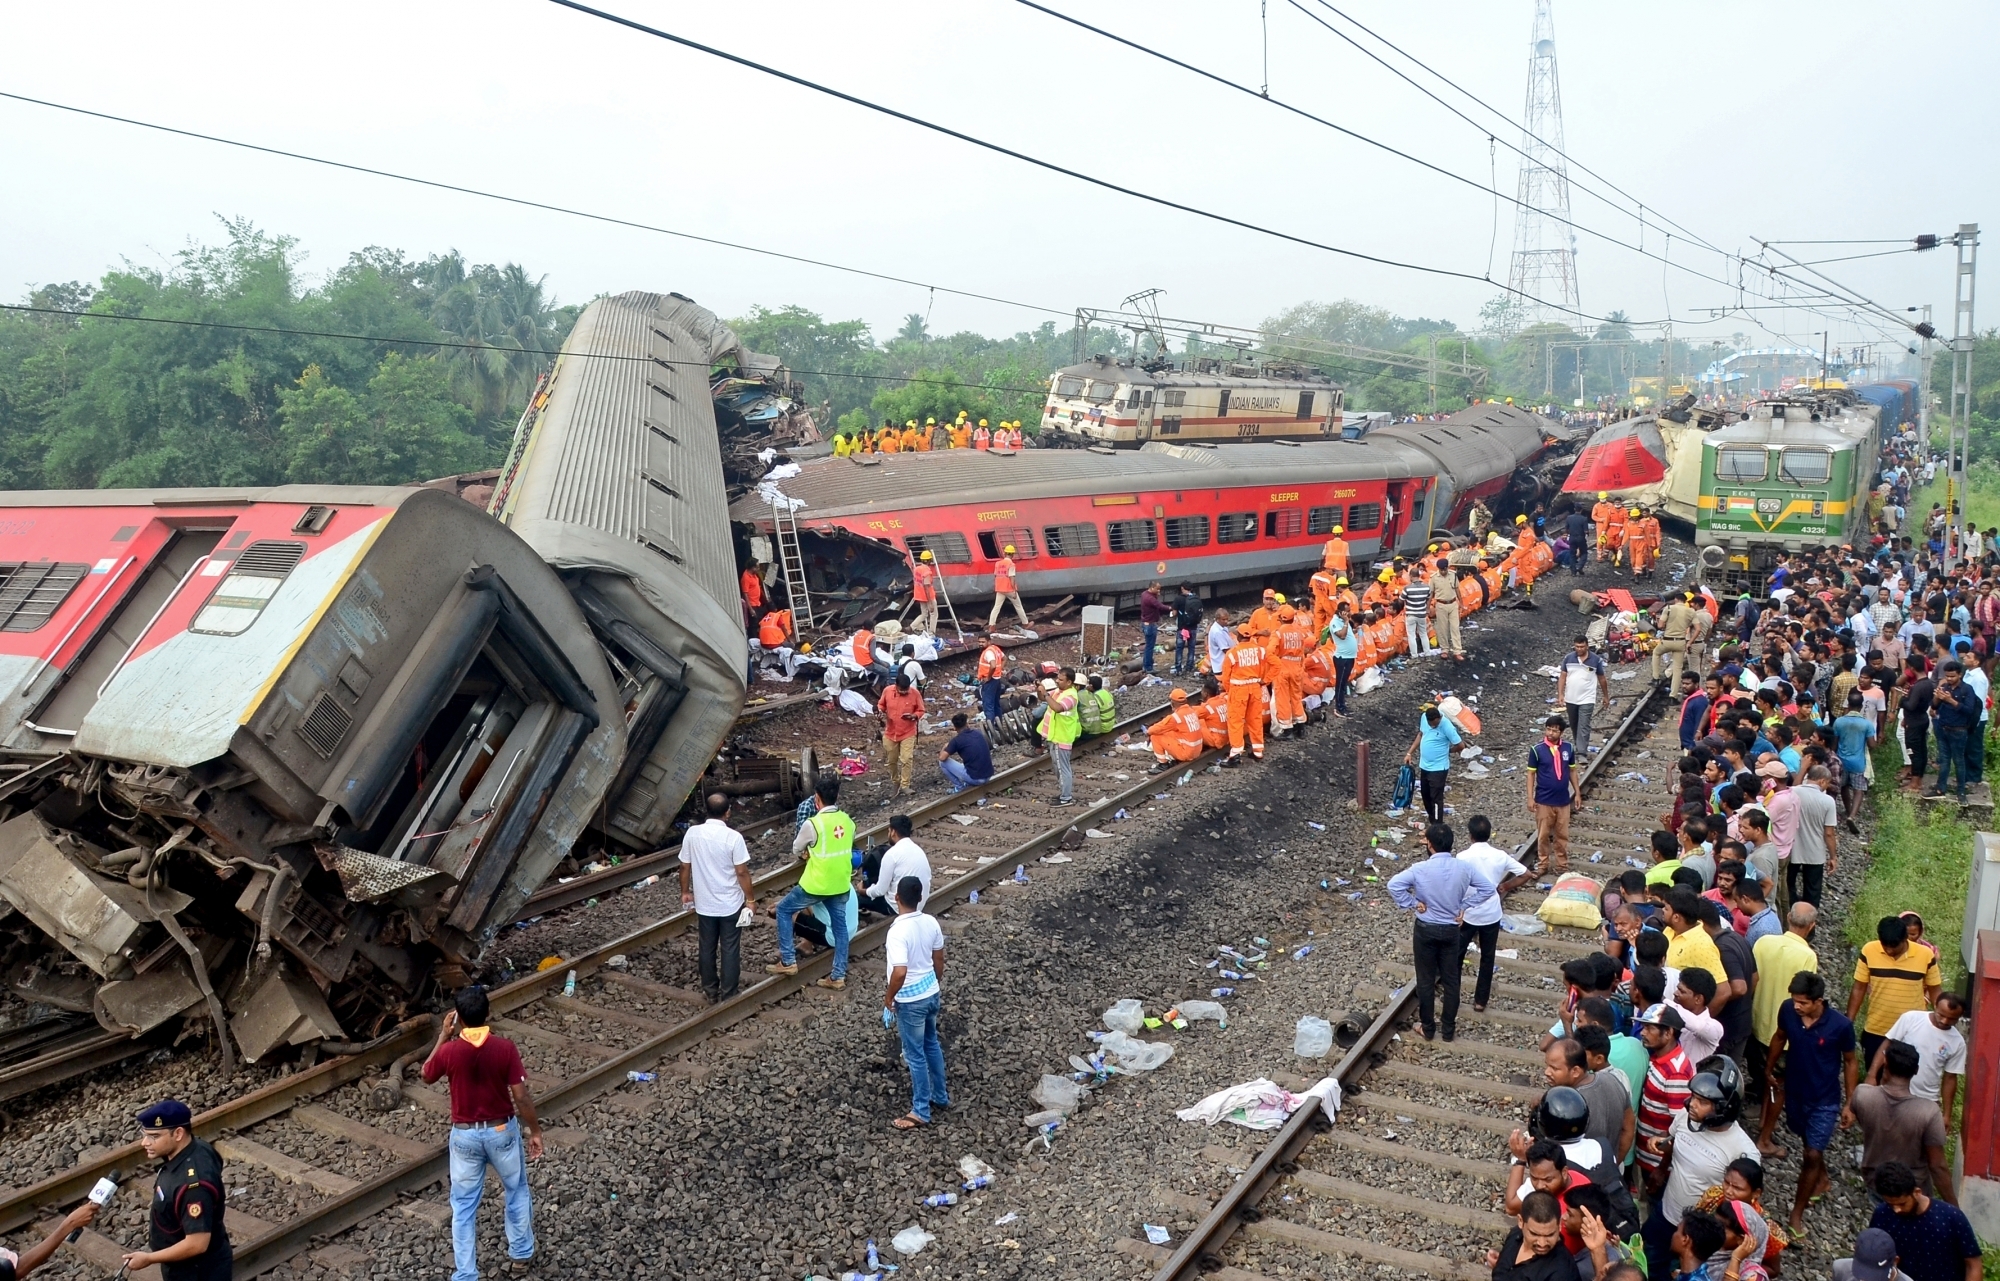  Odisha Train Tragedy: Cbi Collects Evidence From Accident Site-TeluguStop.com